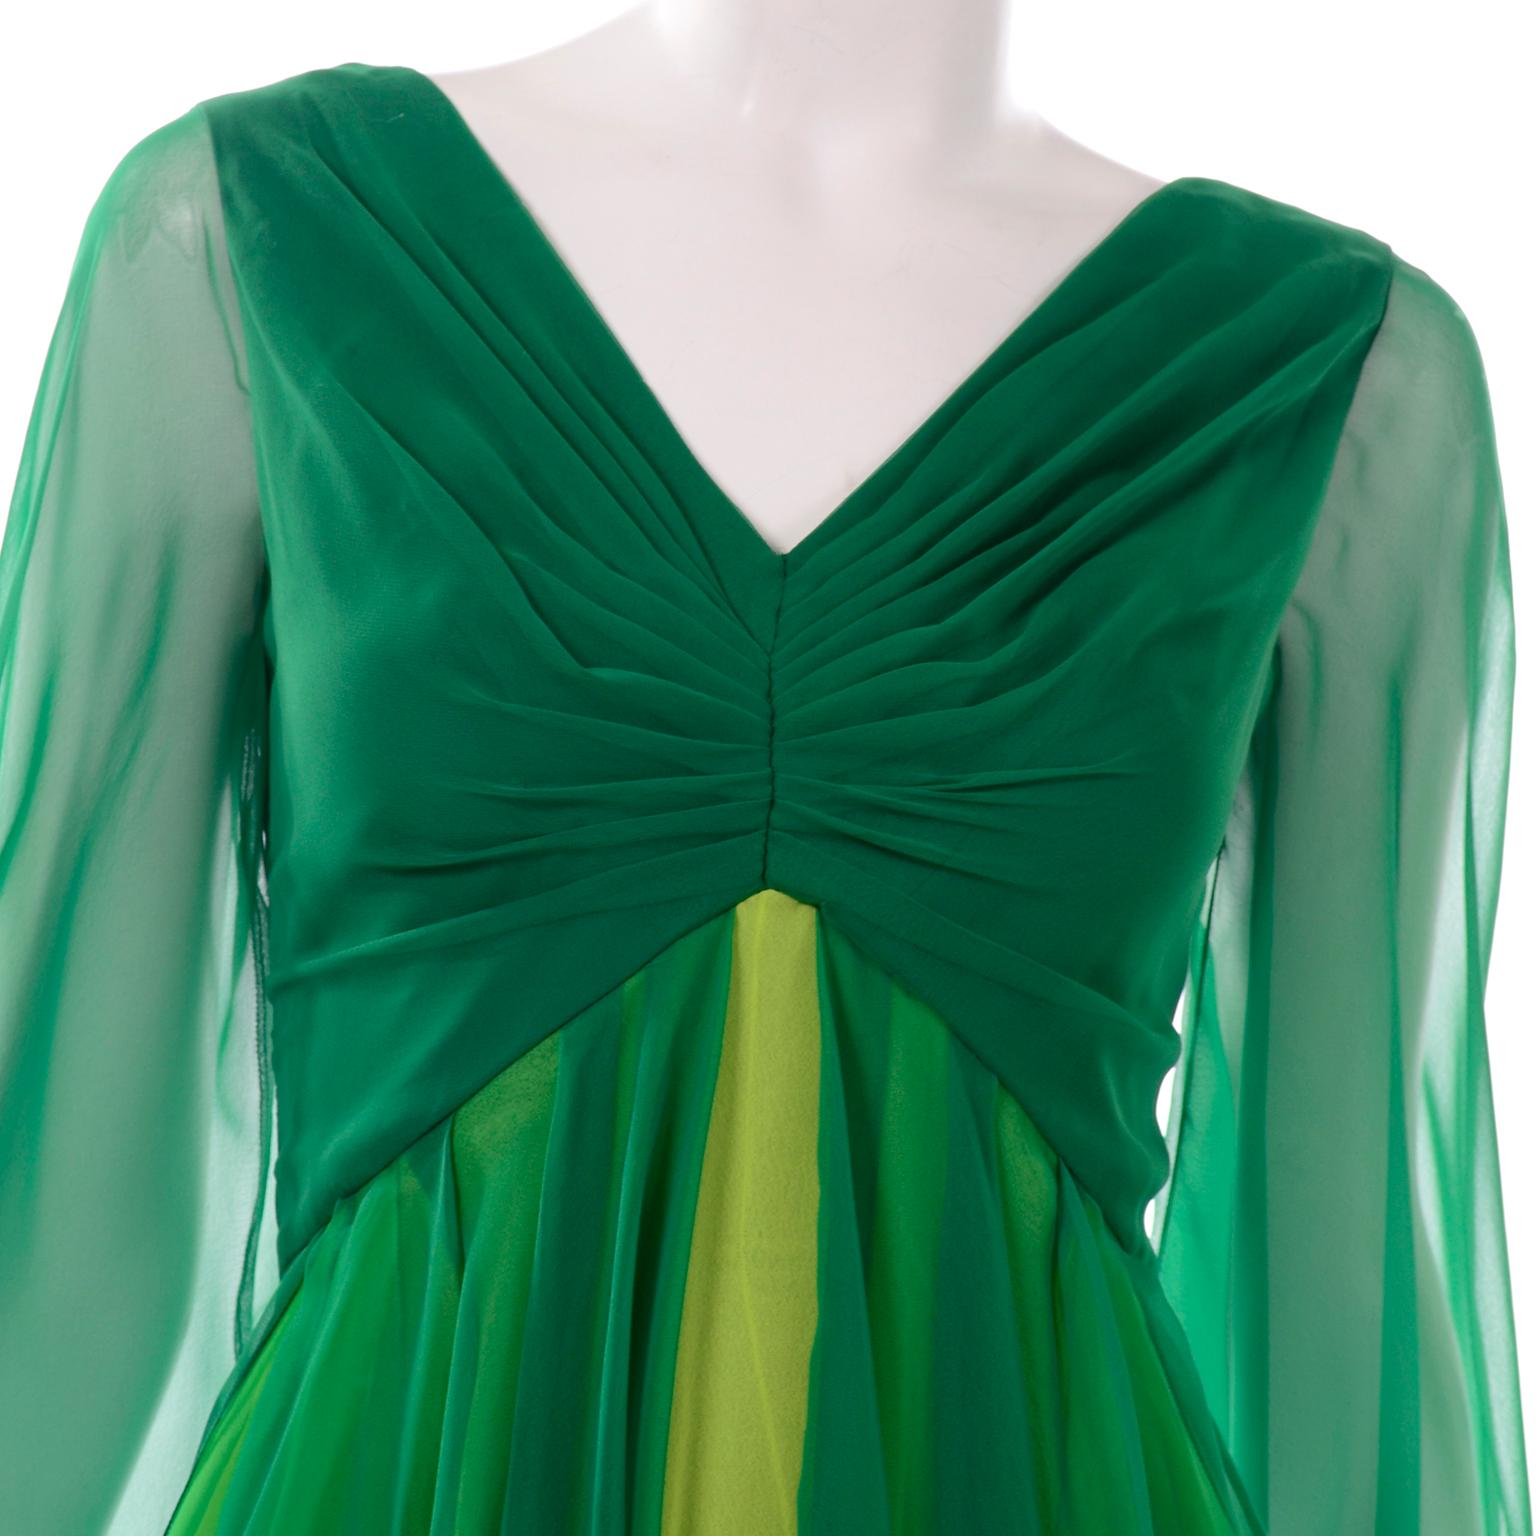 Vintage Layered Flowing Evening Dress in Multi Shades of Green Silk Chiffon  For Sale 3